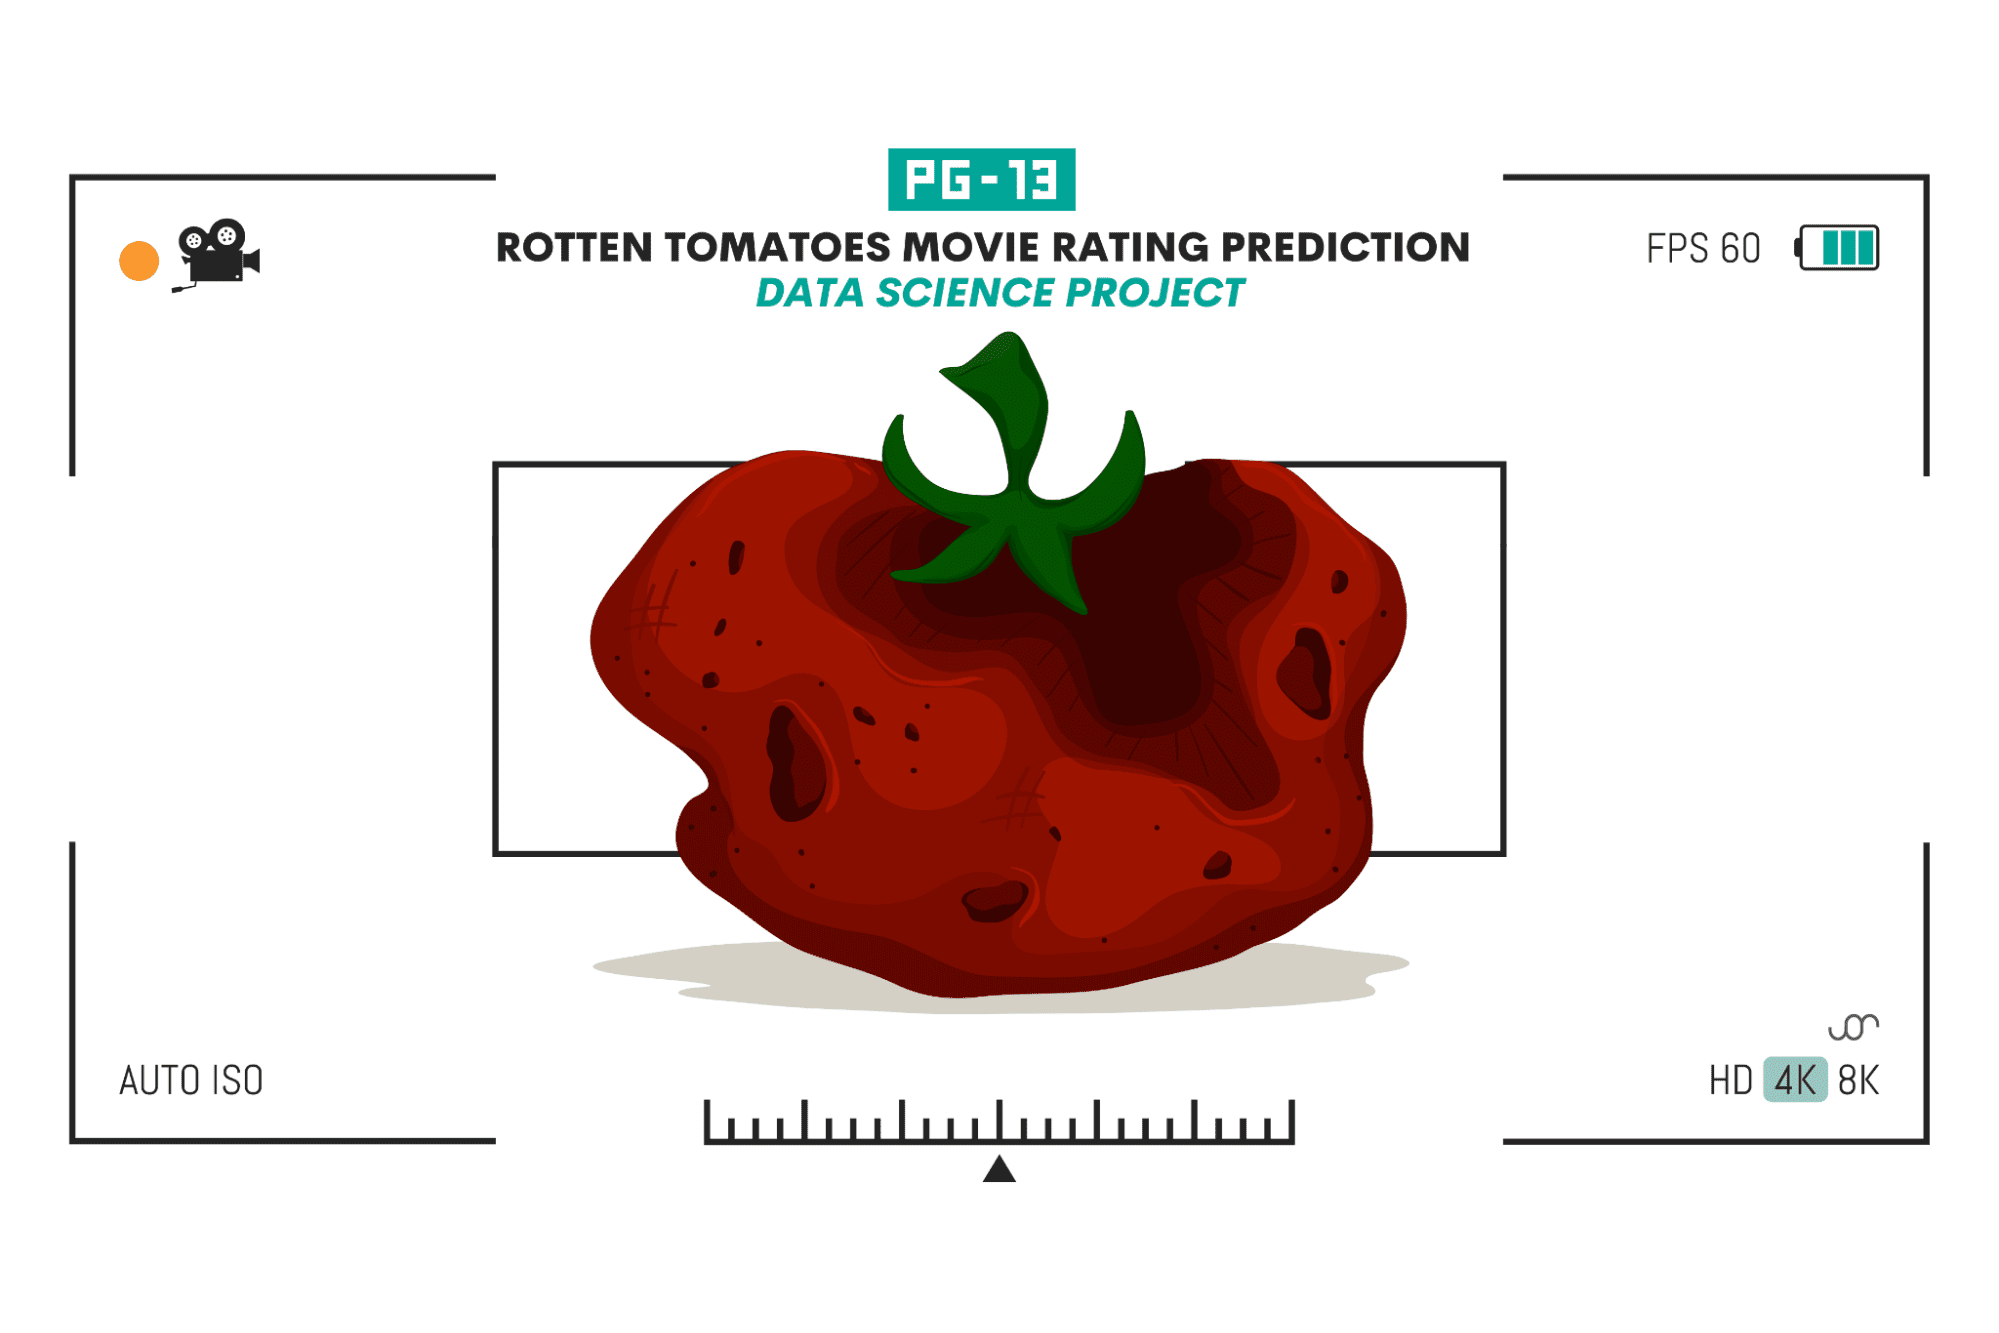 Data Science Project of Rotten Tomatoes Movie Rating Prediction: First Approach